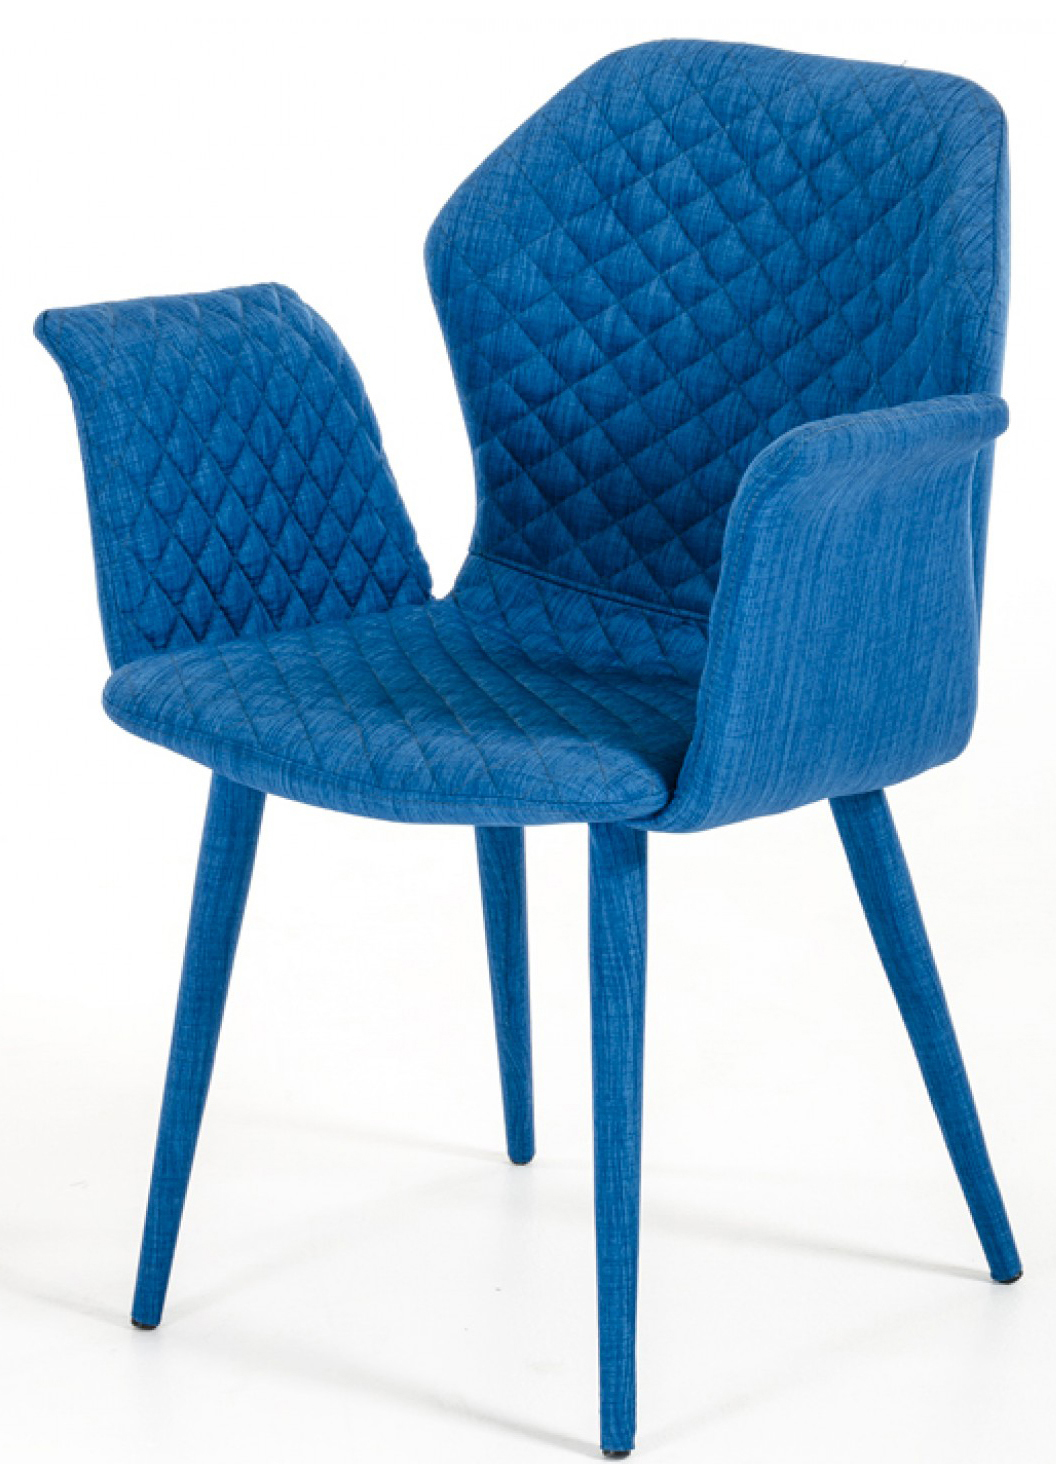 The Adamo Blue Upholstered Dining Chair is available at AdvancedInteriorDesigns.com